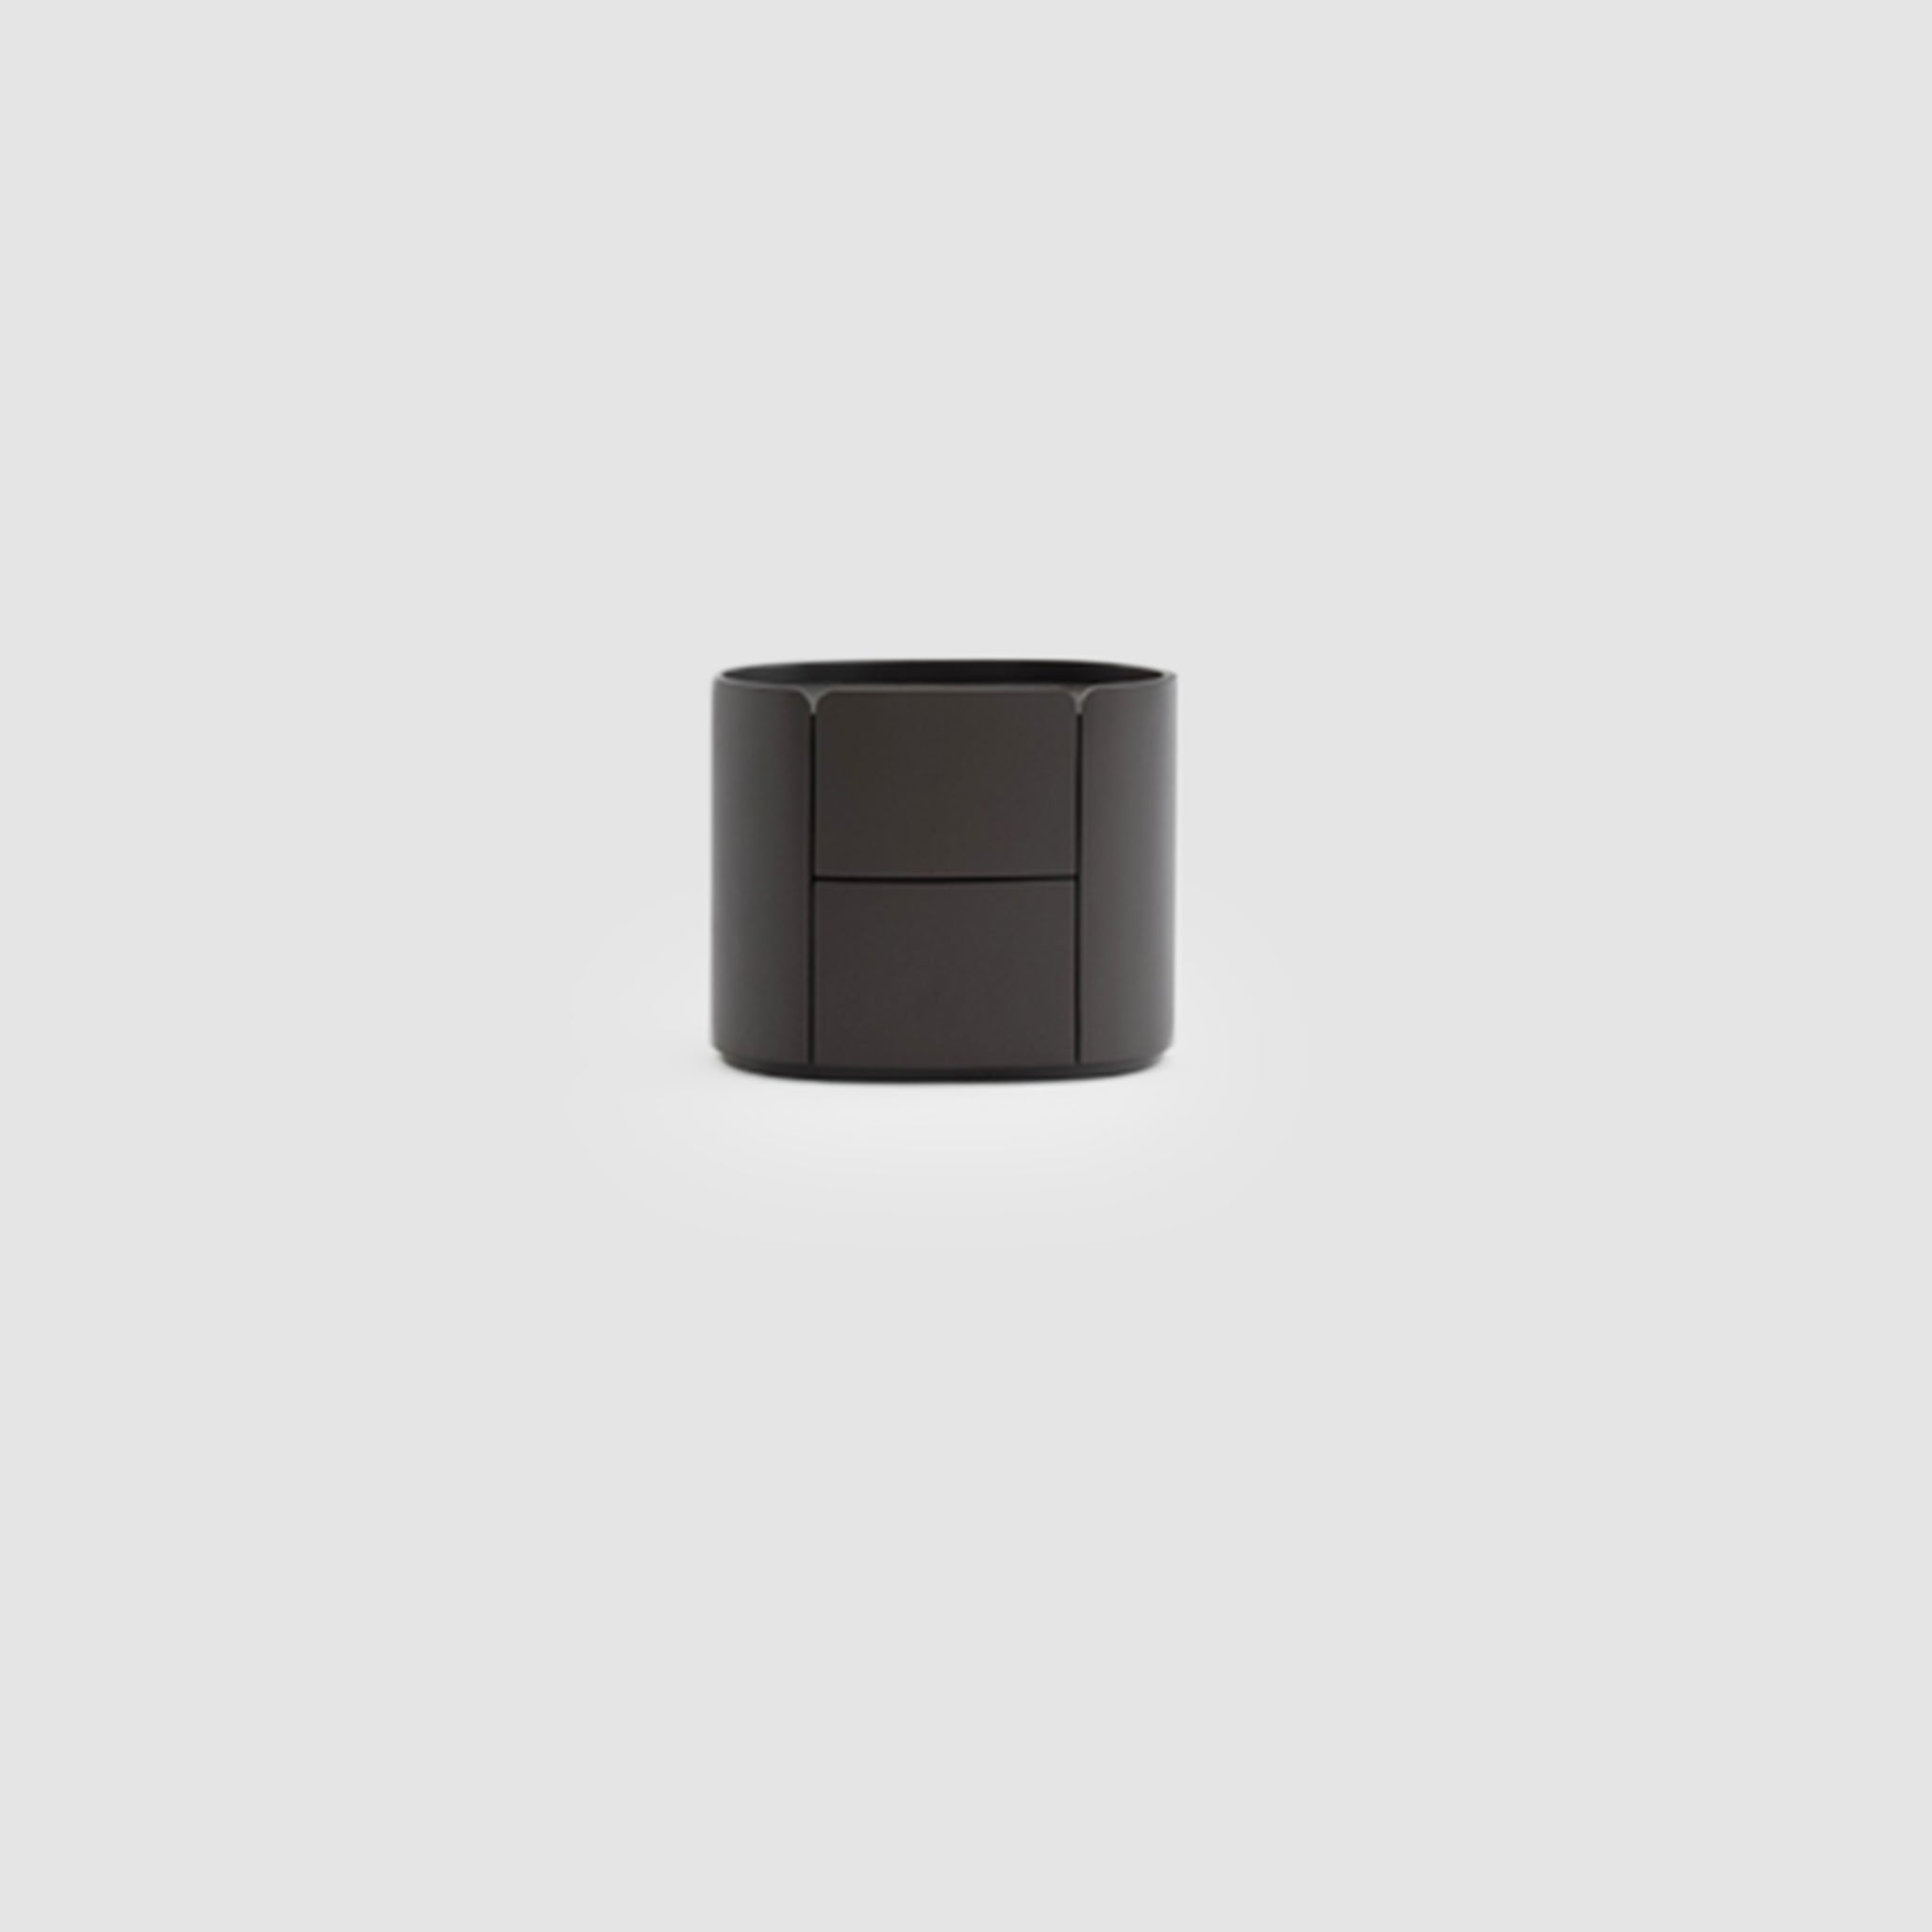 A sleek black bedside table with a cylindrical shape and two drawers, set against a plain light gray background.